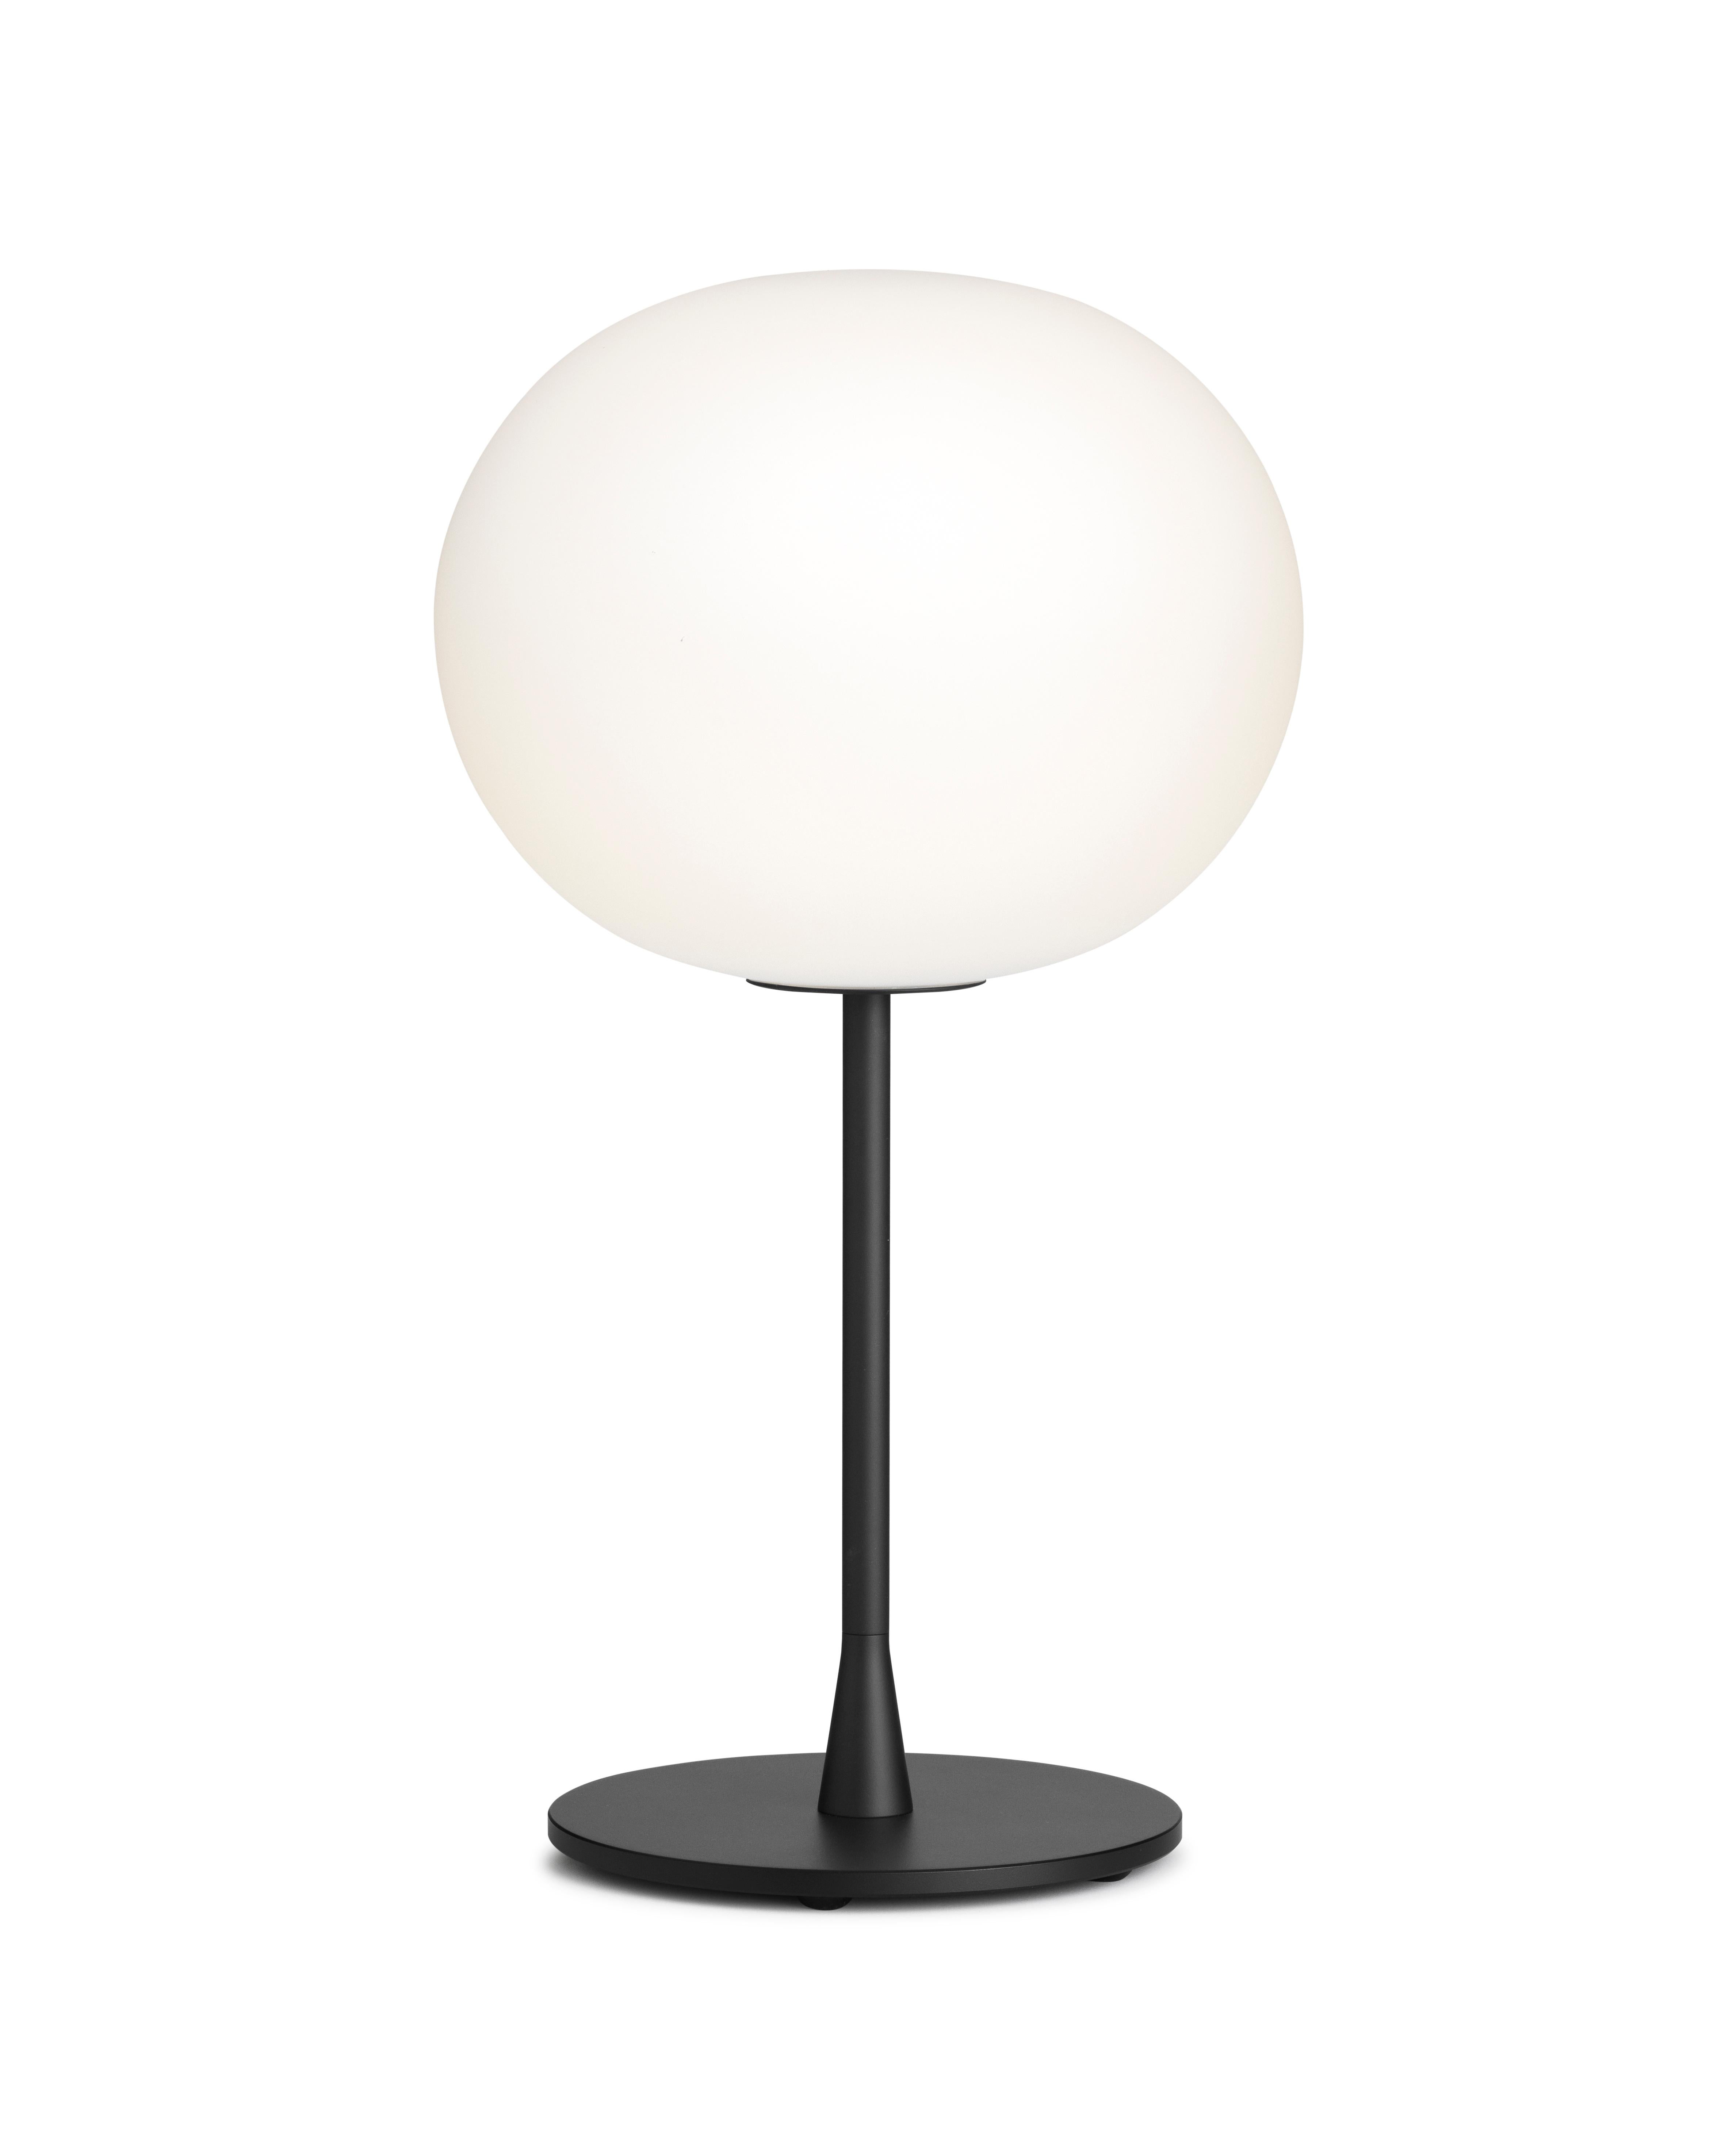 FLOS Glo Ball T1 Table Lamp in Black, by Jasper Morrison

Part of the popular Glo-Ball Series, the Glo-Ball T was created in 1998 by artist Jasper Morrison to invoke the radiant calm of a full moon. This unique table lamp has a white acid-etched